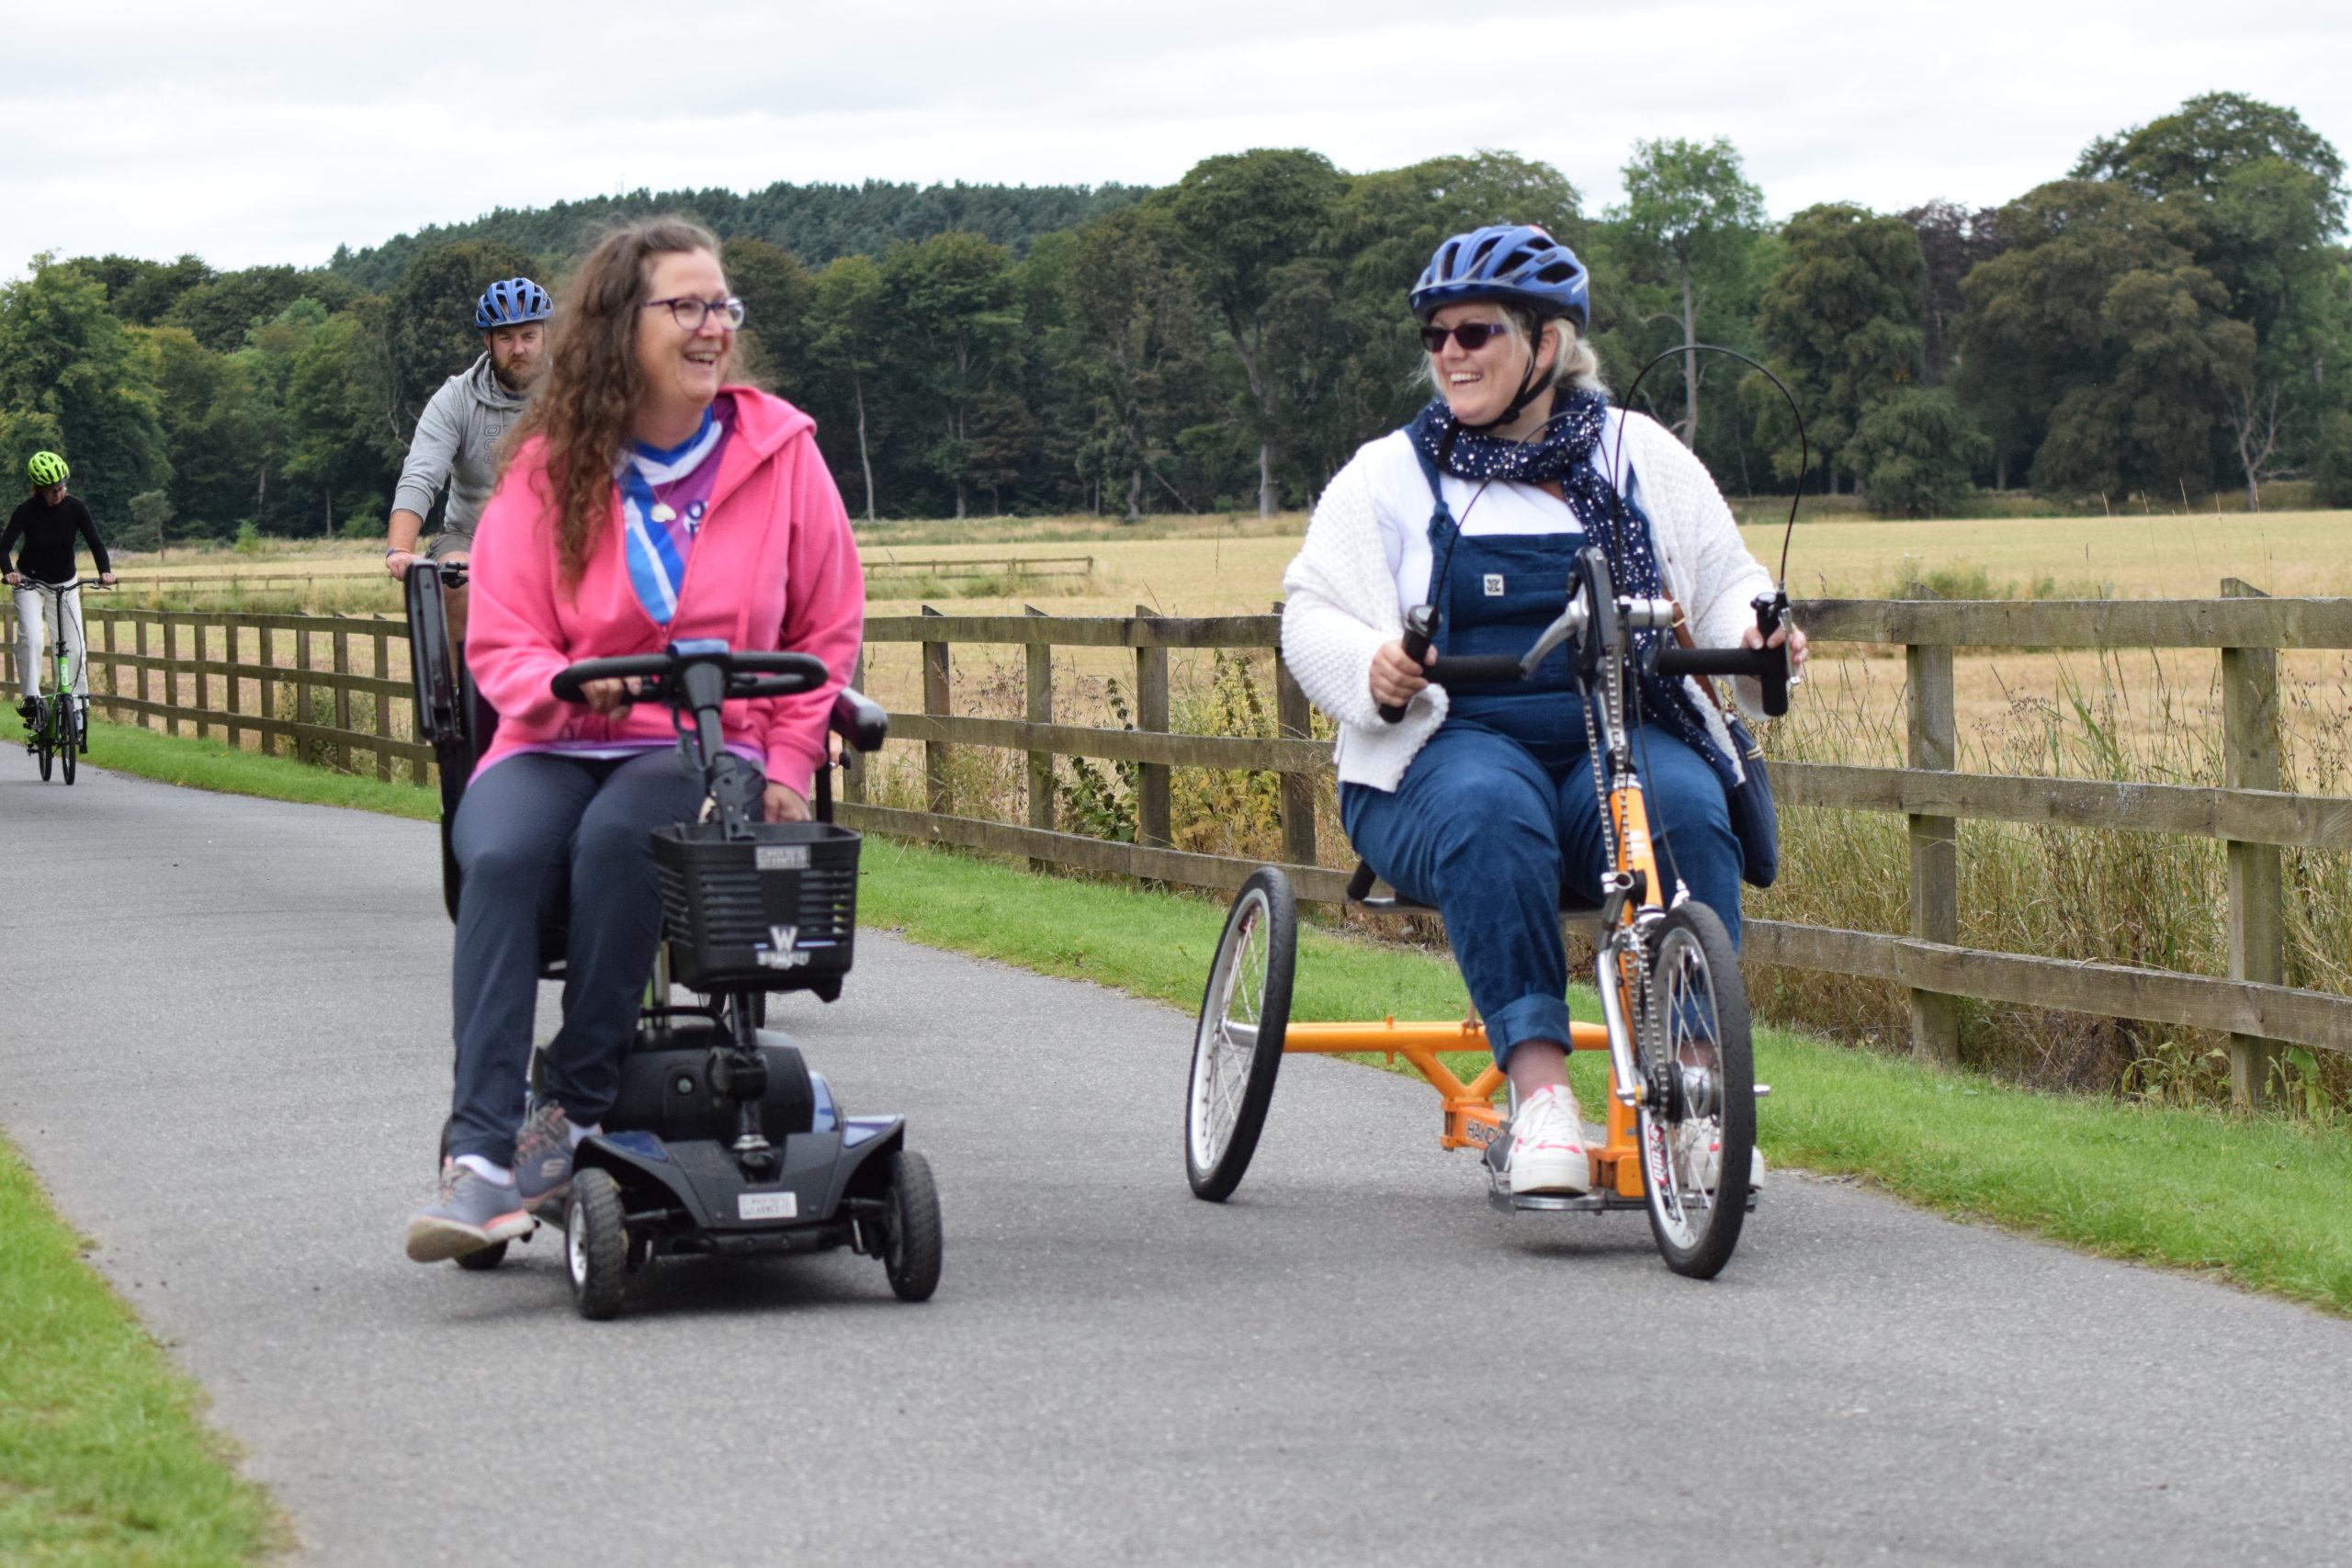 People using various types of transport options on a shared use path, front and centre a person on a mobility scooter and a person using a hand cycle